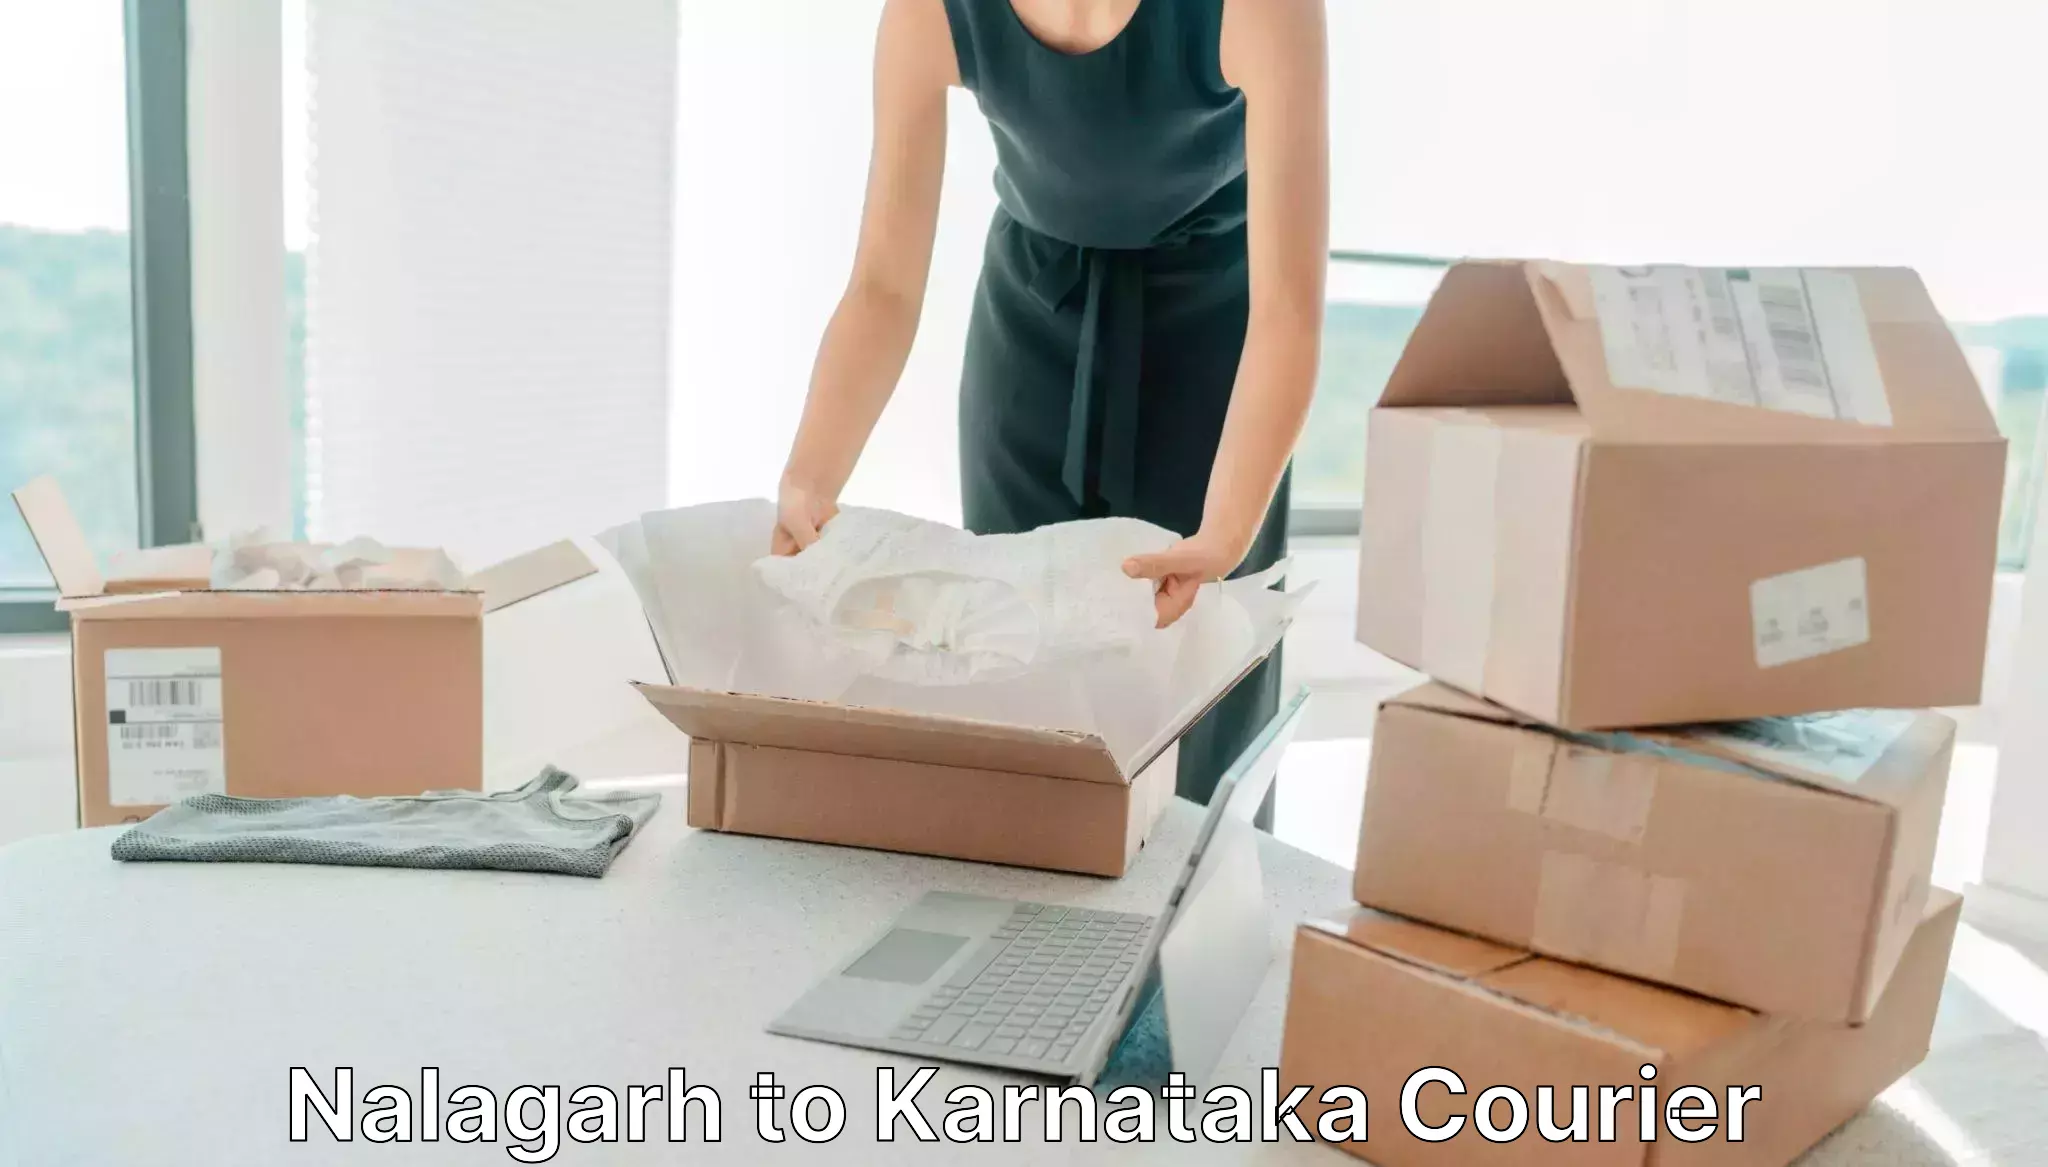 Subscription-based courier Nalagarh to Lingasugur